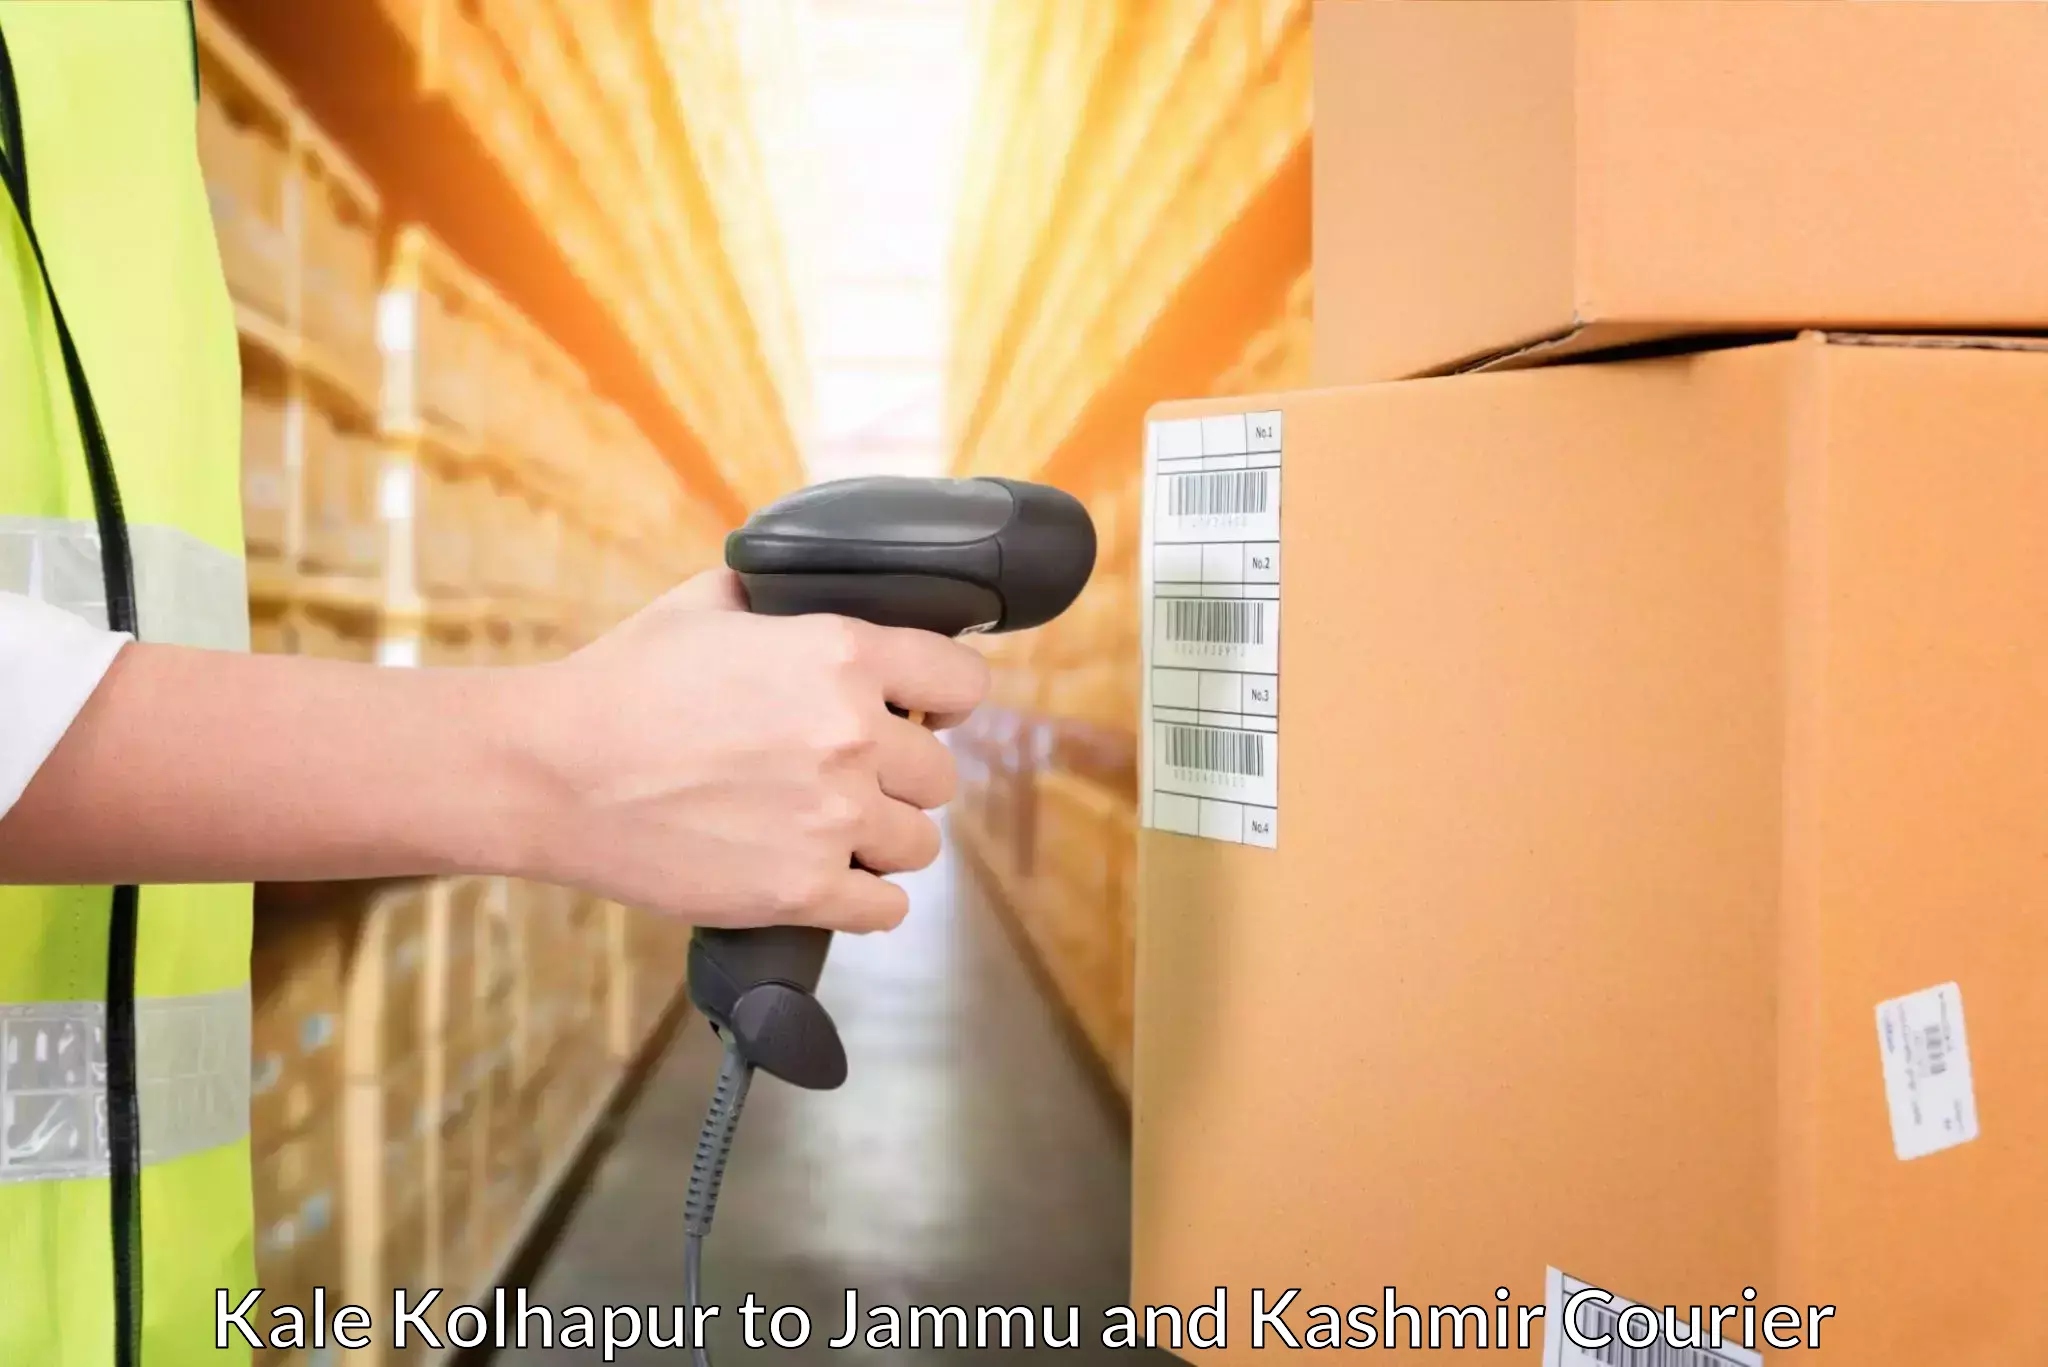 On-call courier service Kale Kolhapur to University of Jammu